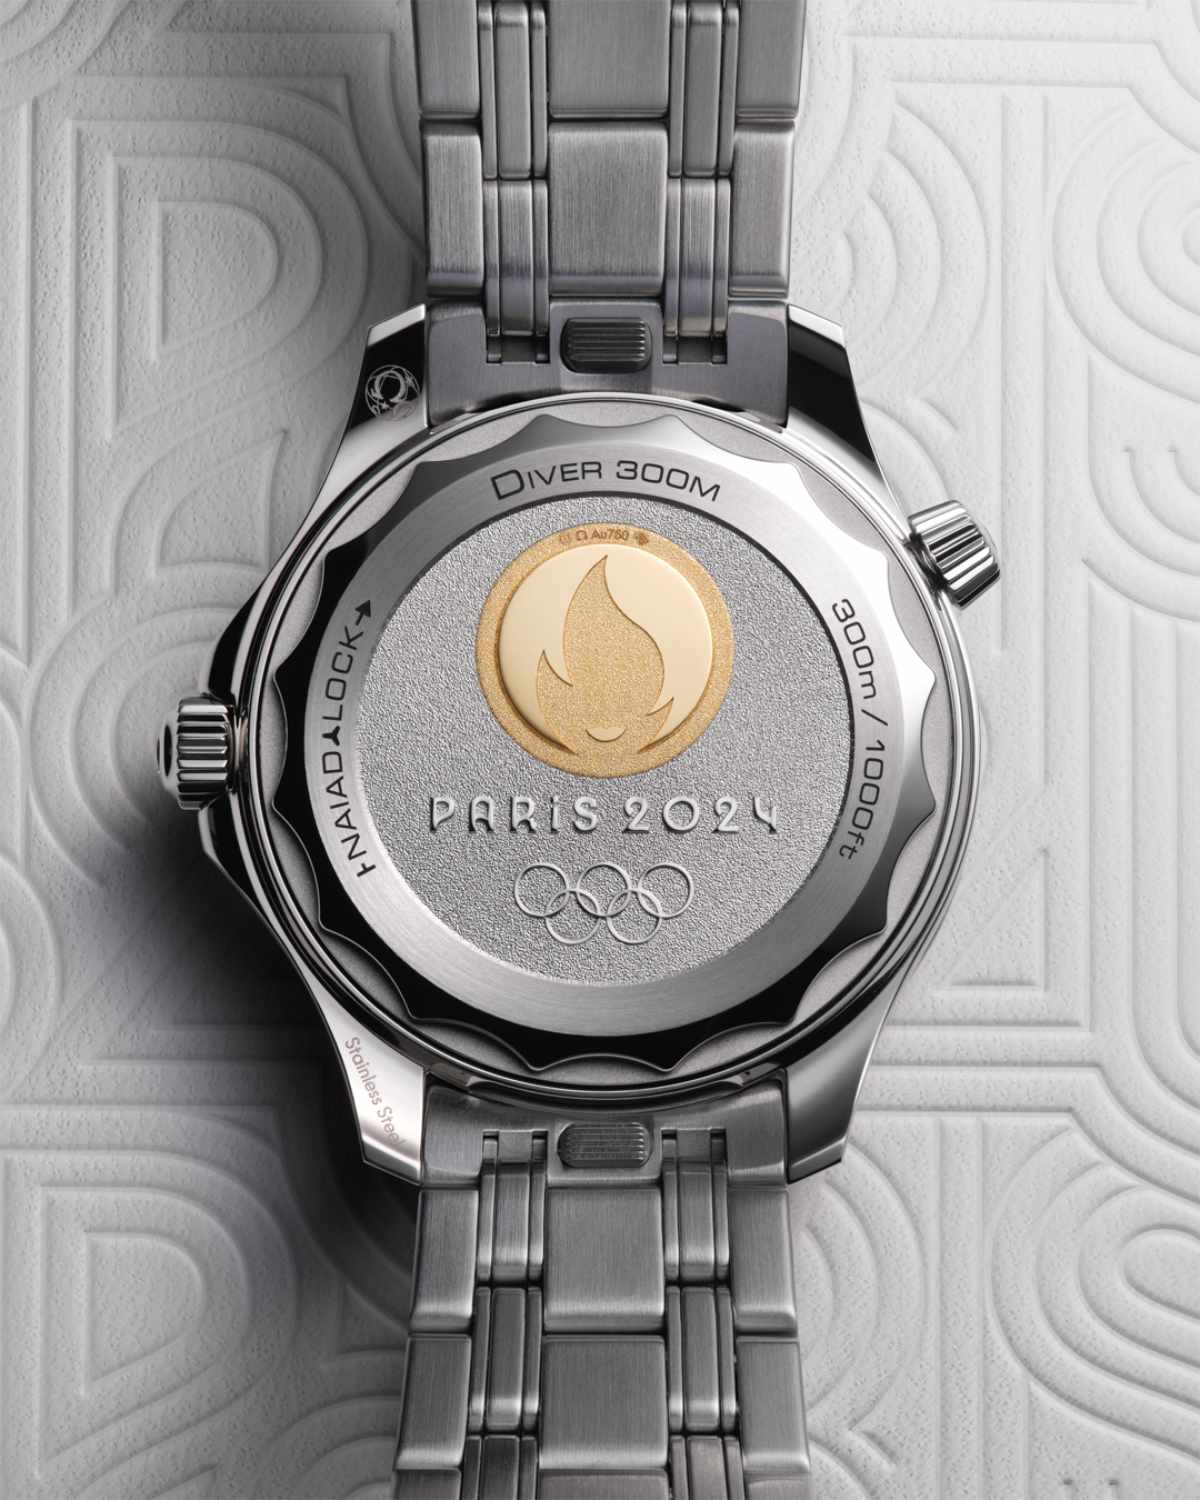 New OMEGA Watch Marks One Year To The Olympic Games Paris 2024